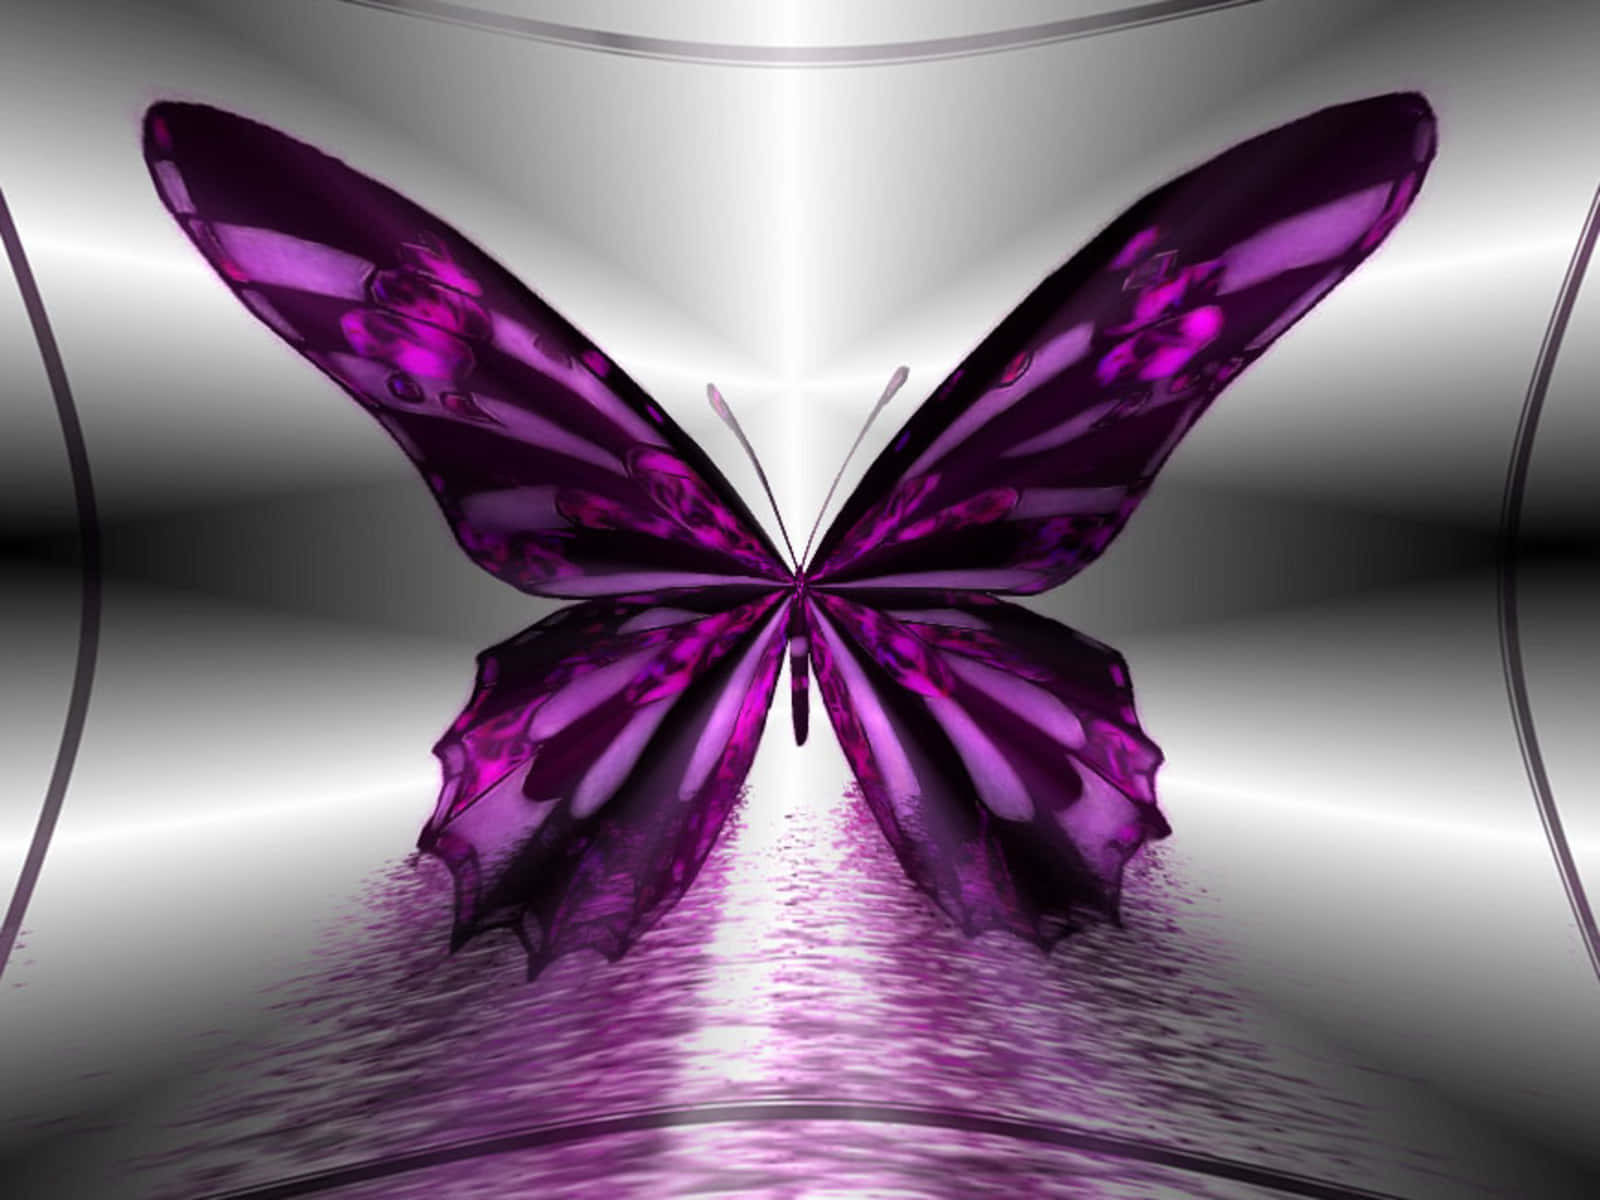 A butterfly emerges into the world and spreads its wings in wonder. Wallpaper